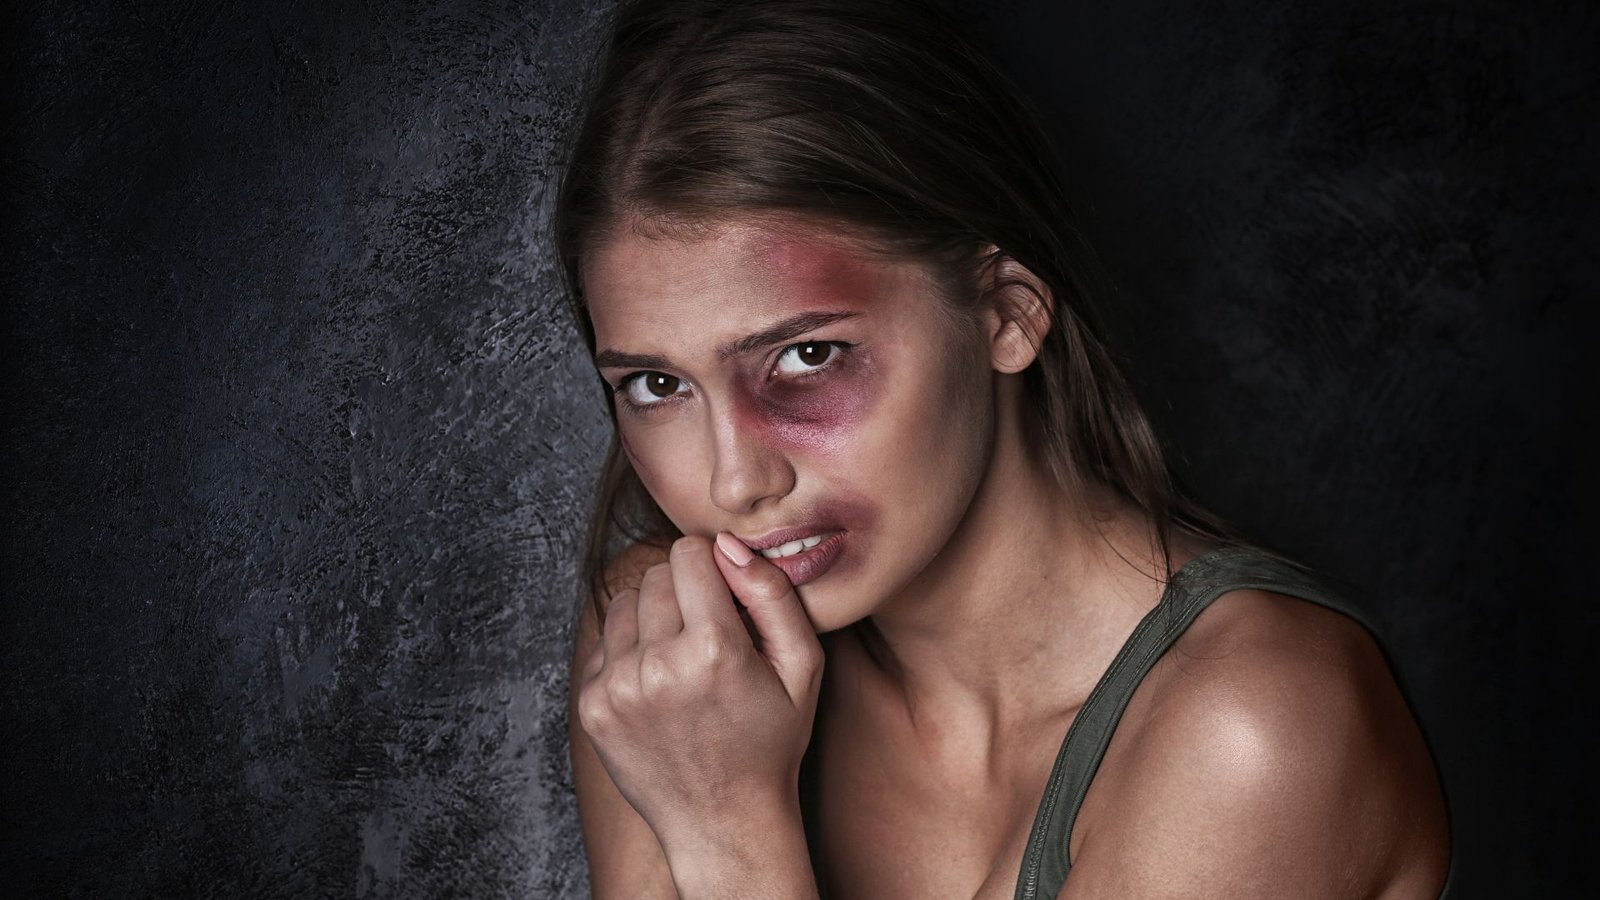 Battered Woman Syndrome In India, Lawforeverything